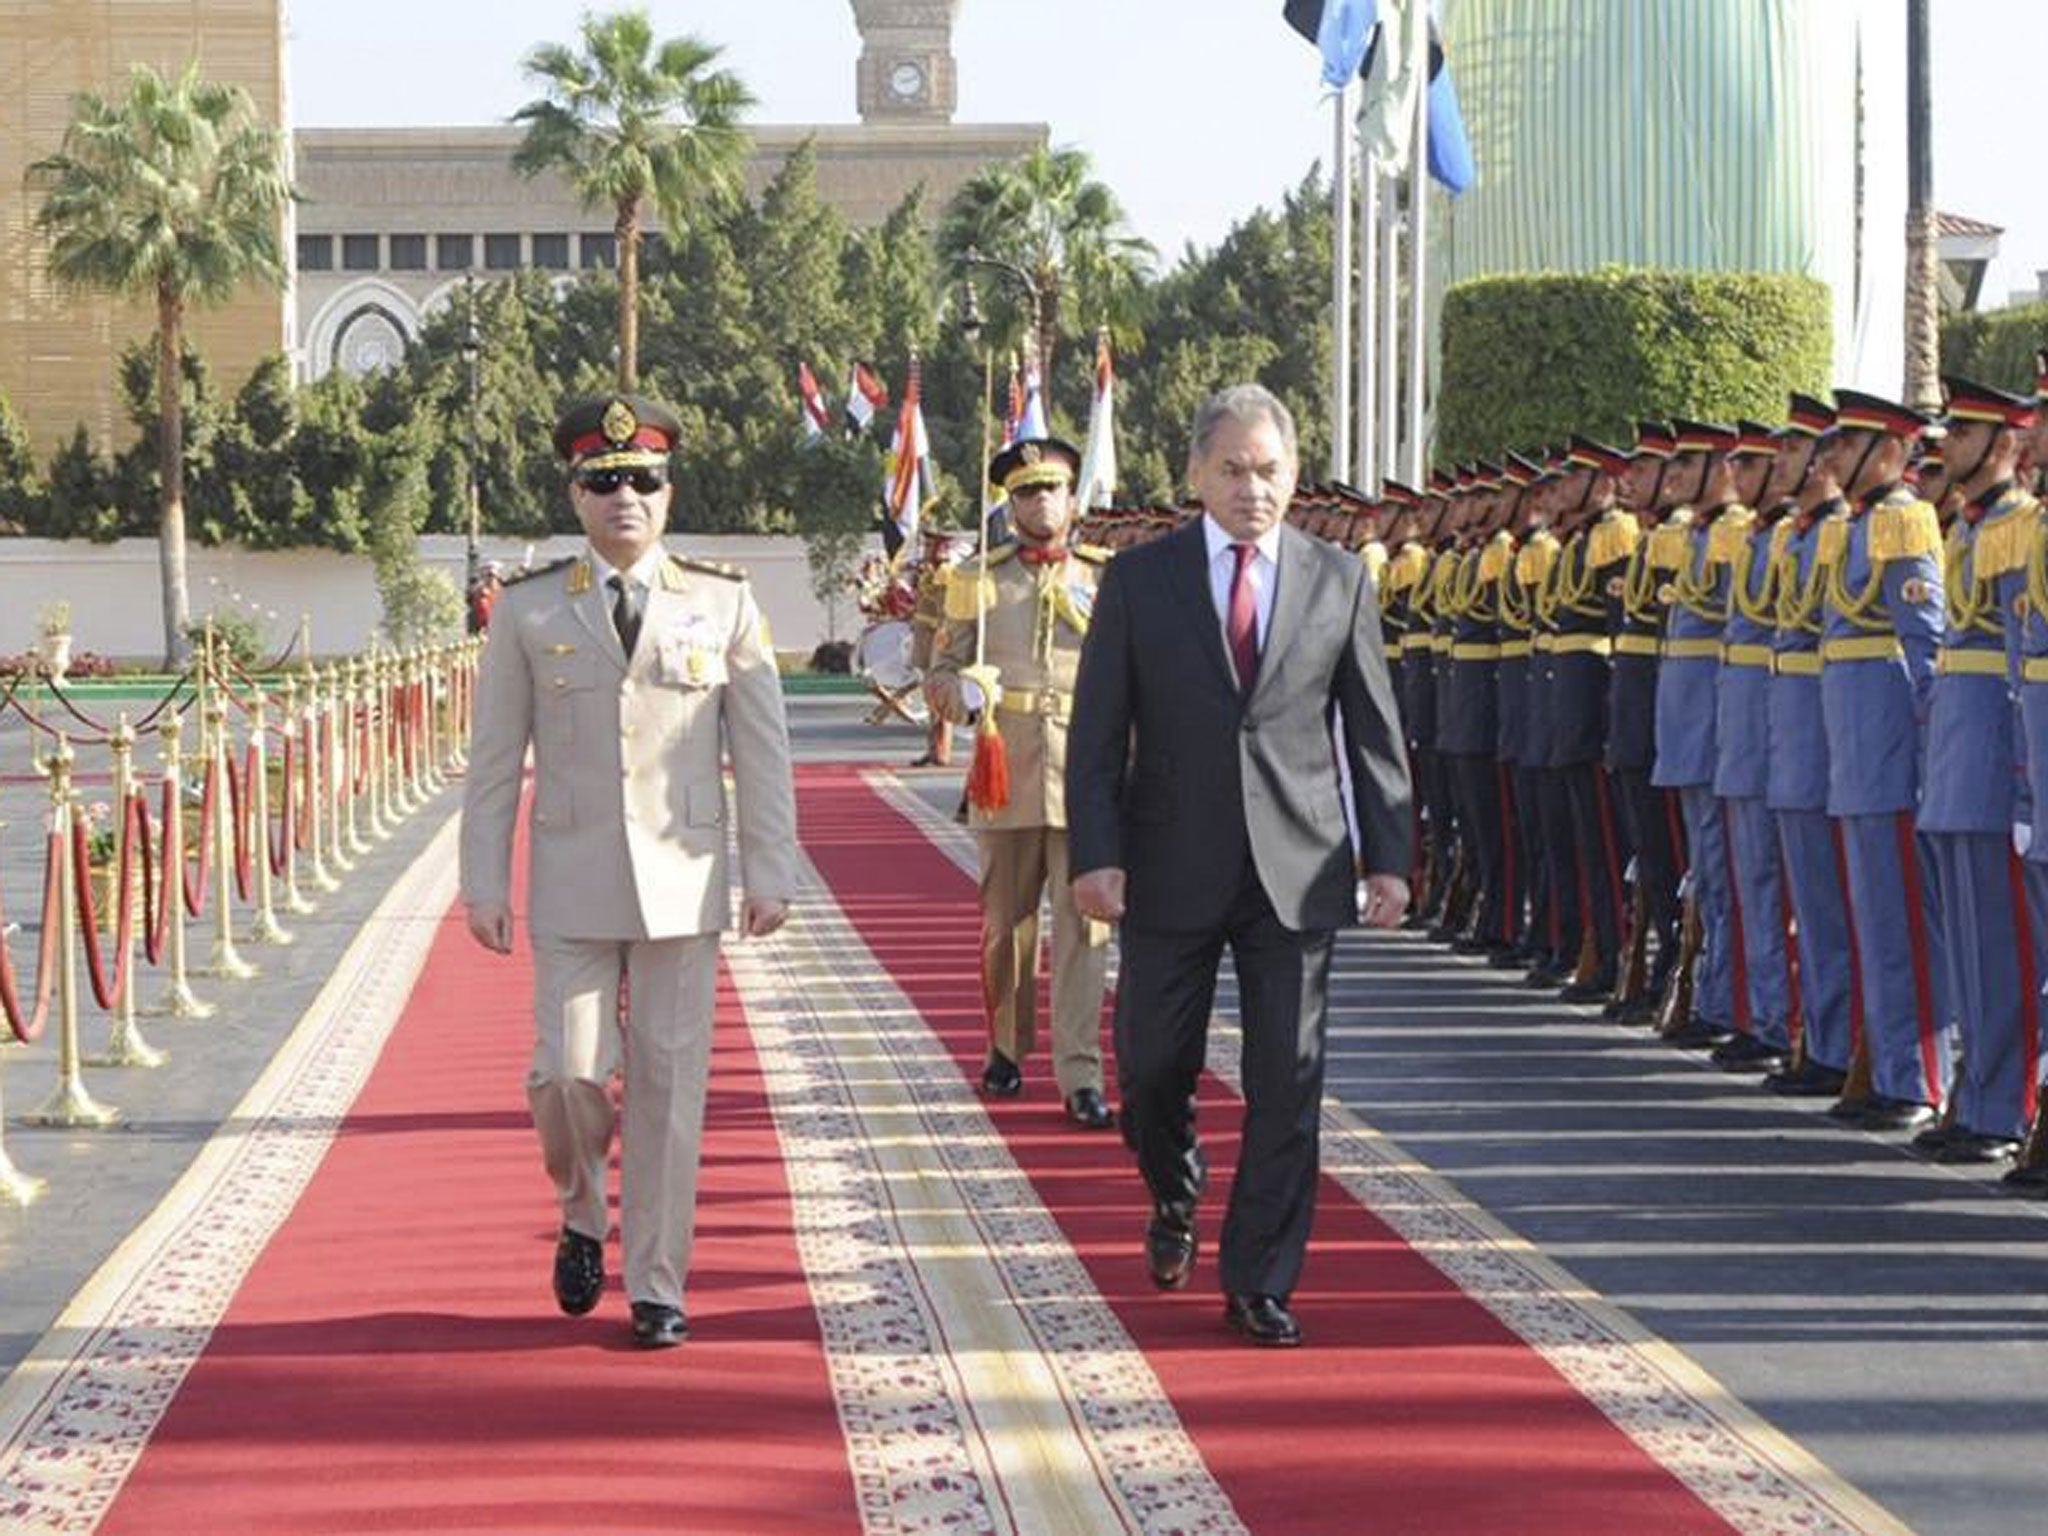 Egypt's Army Chief and Defence Minister General Abdel Fattah al-Sisi, right, walks with Russia's Defence Minister Sergei Shoigu